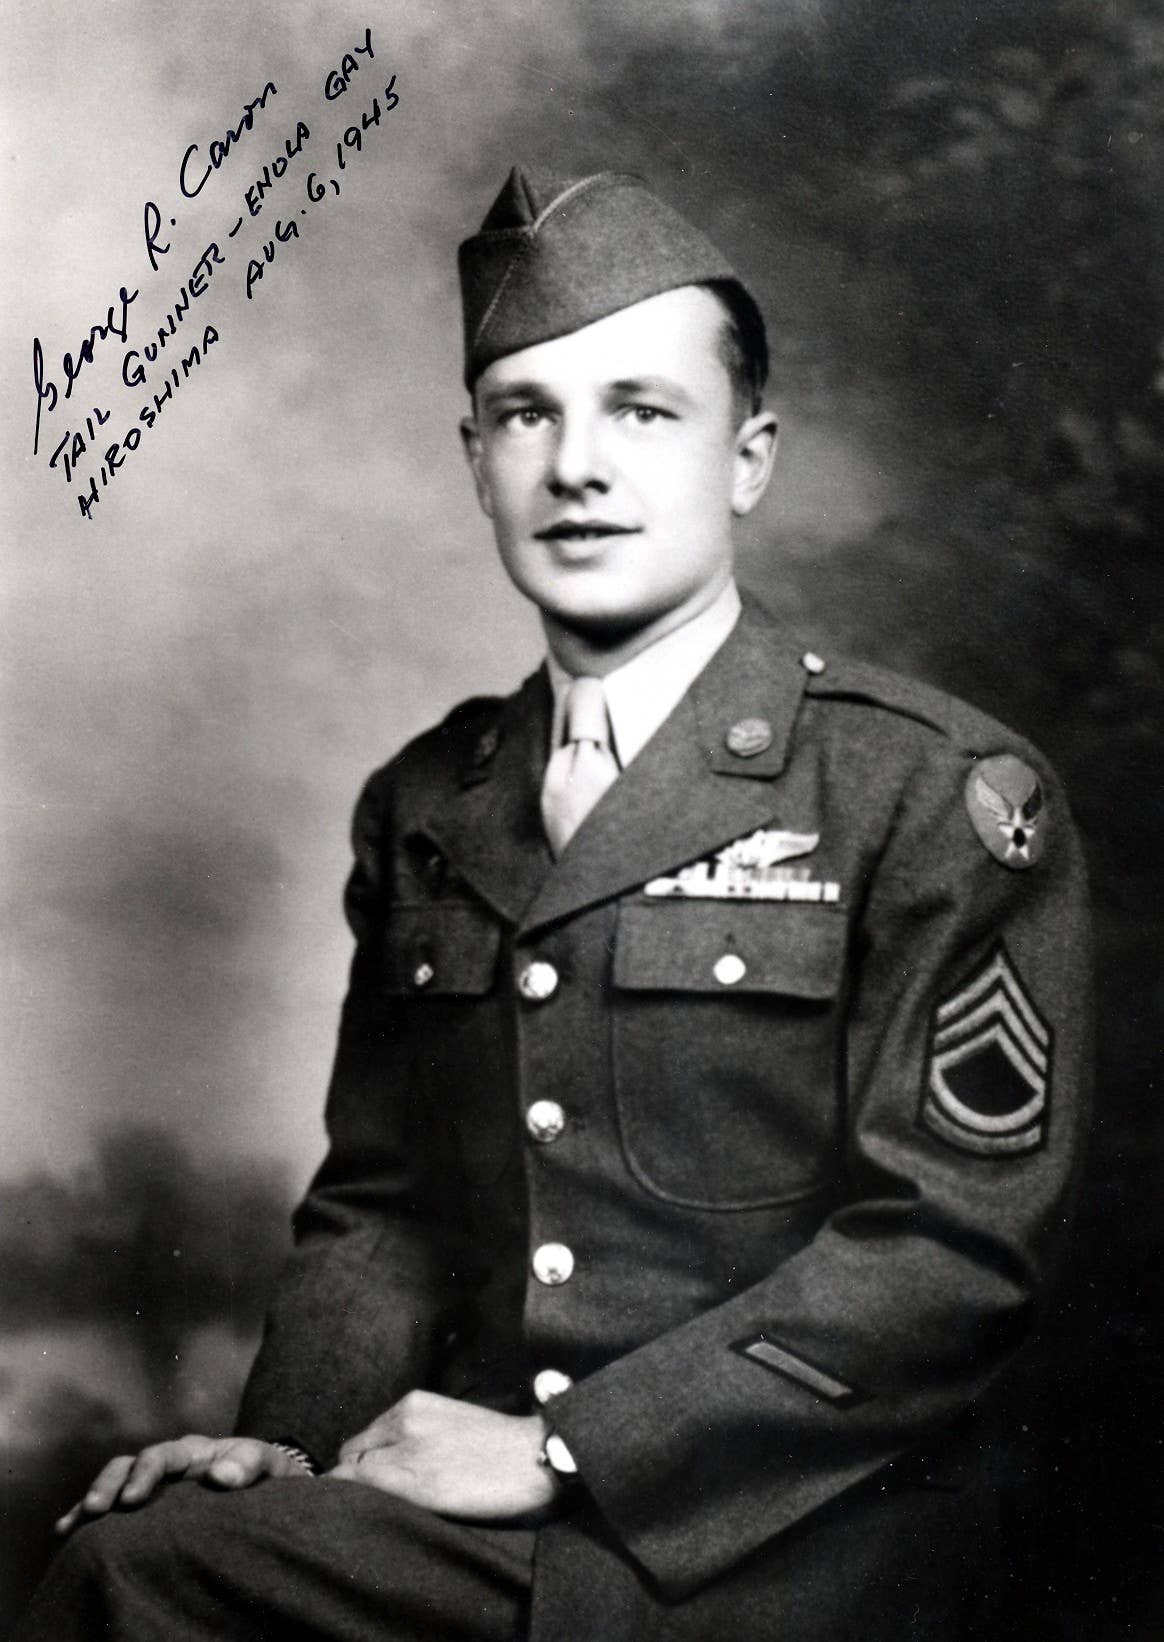 George "Bob" Caron, pictured in 1945. <em>Unknown author via Wikimedia Commons</em>